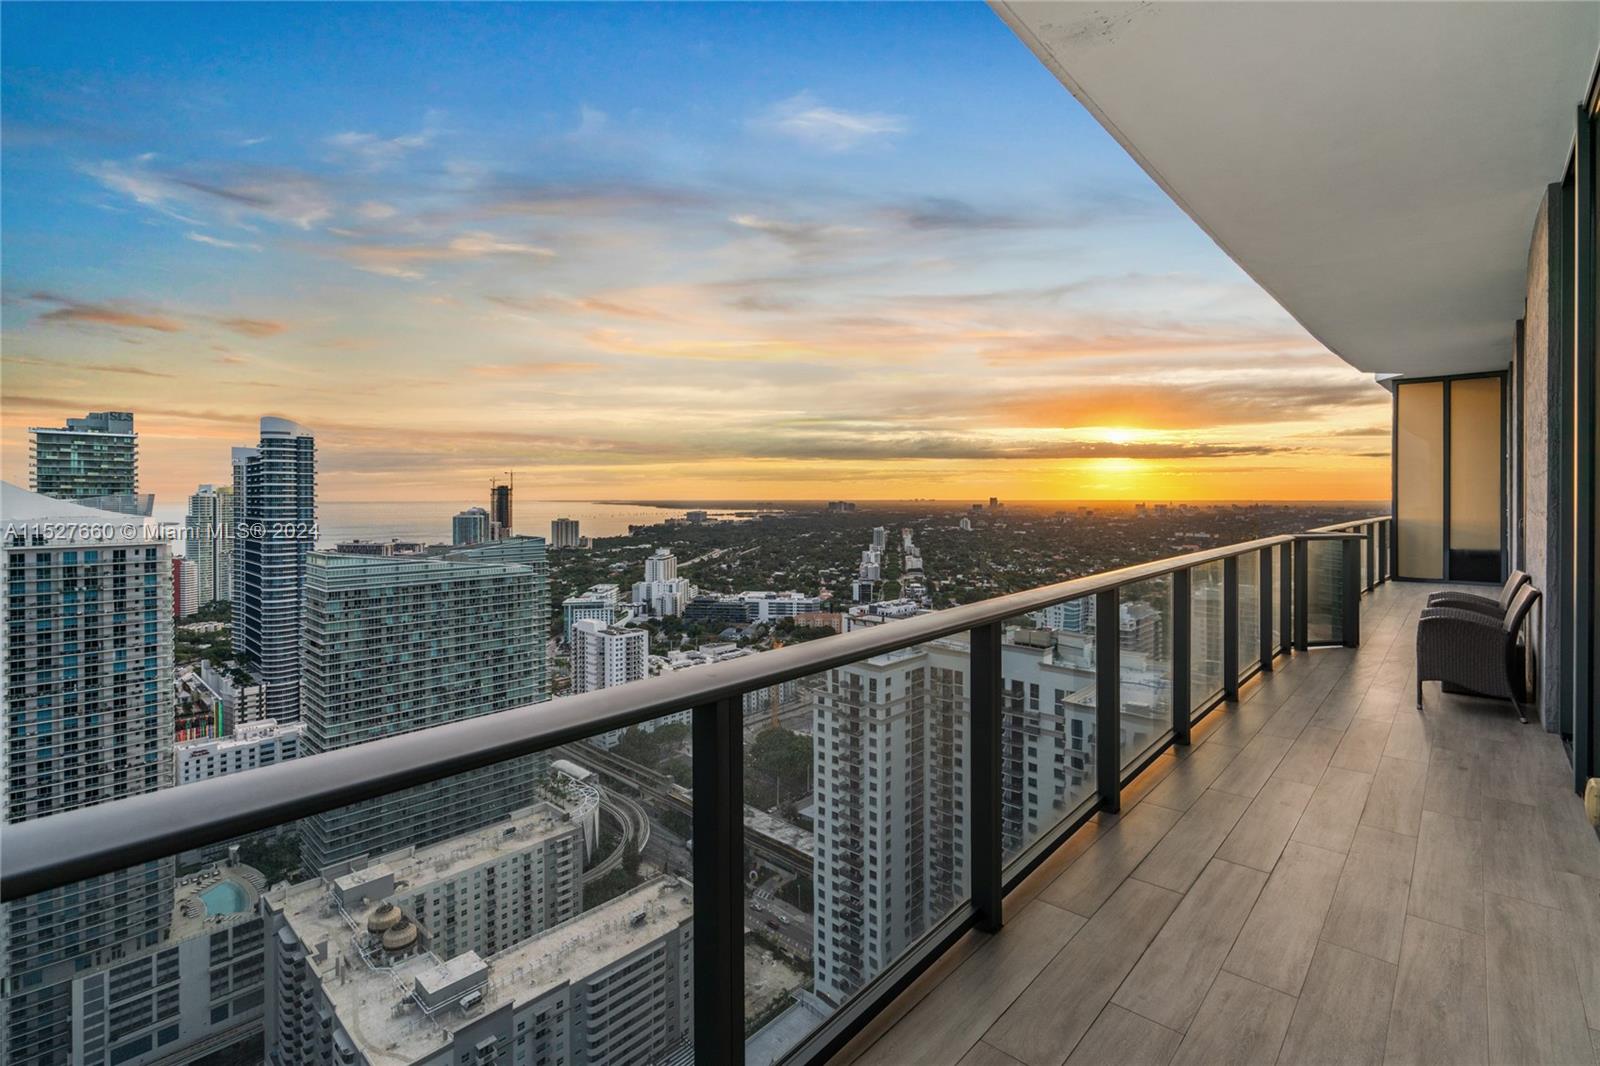 This Lower Penthouse at Brickell Heights East Tower is an exquisite residence, featuring 3 bedrooms and a convertible den, 4 full bathrooms, and breathtaking views of Biscayne Bay and the Miami skyline. The floor-to-ceiling windows allow for abundant natural light and showcase the expansive balcony unit has 12 ft high ceilings throughout. Second bedroom is also an en-suite master bedroom. The residence also includes 32 x 32 porcelain tile, a spacious laundry room, and 3 parking spaces. You'll enjoy the convenience of being within walking distance to Brickell City Center and a variety of top-rated restaurants and shops. Live in luxury and experience the best of Miami's city lifestyle. UNIT COMES WITH 2 ASSIGNED PARKING SPOTS AND 1 VALET.